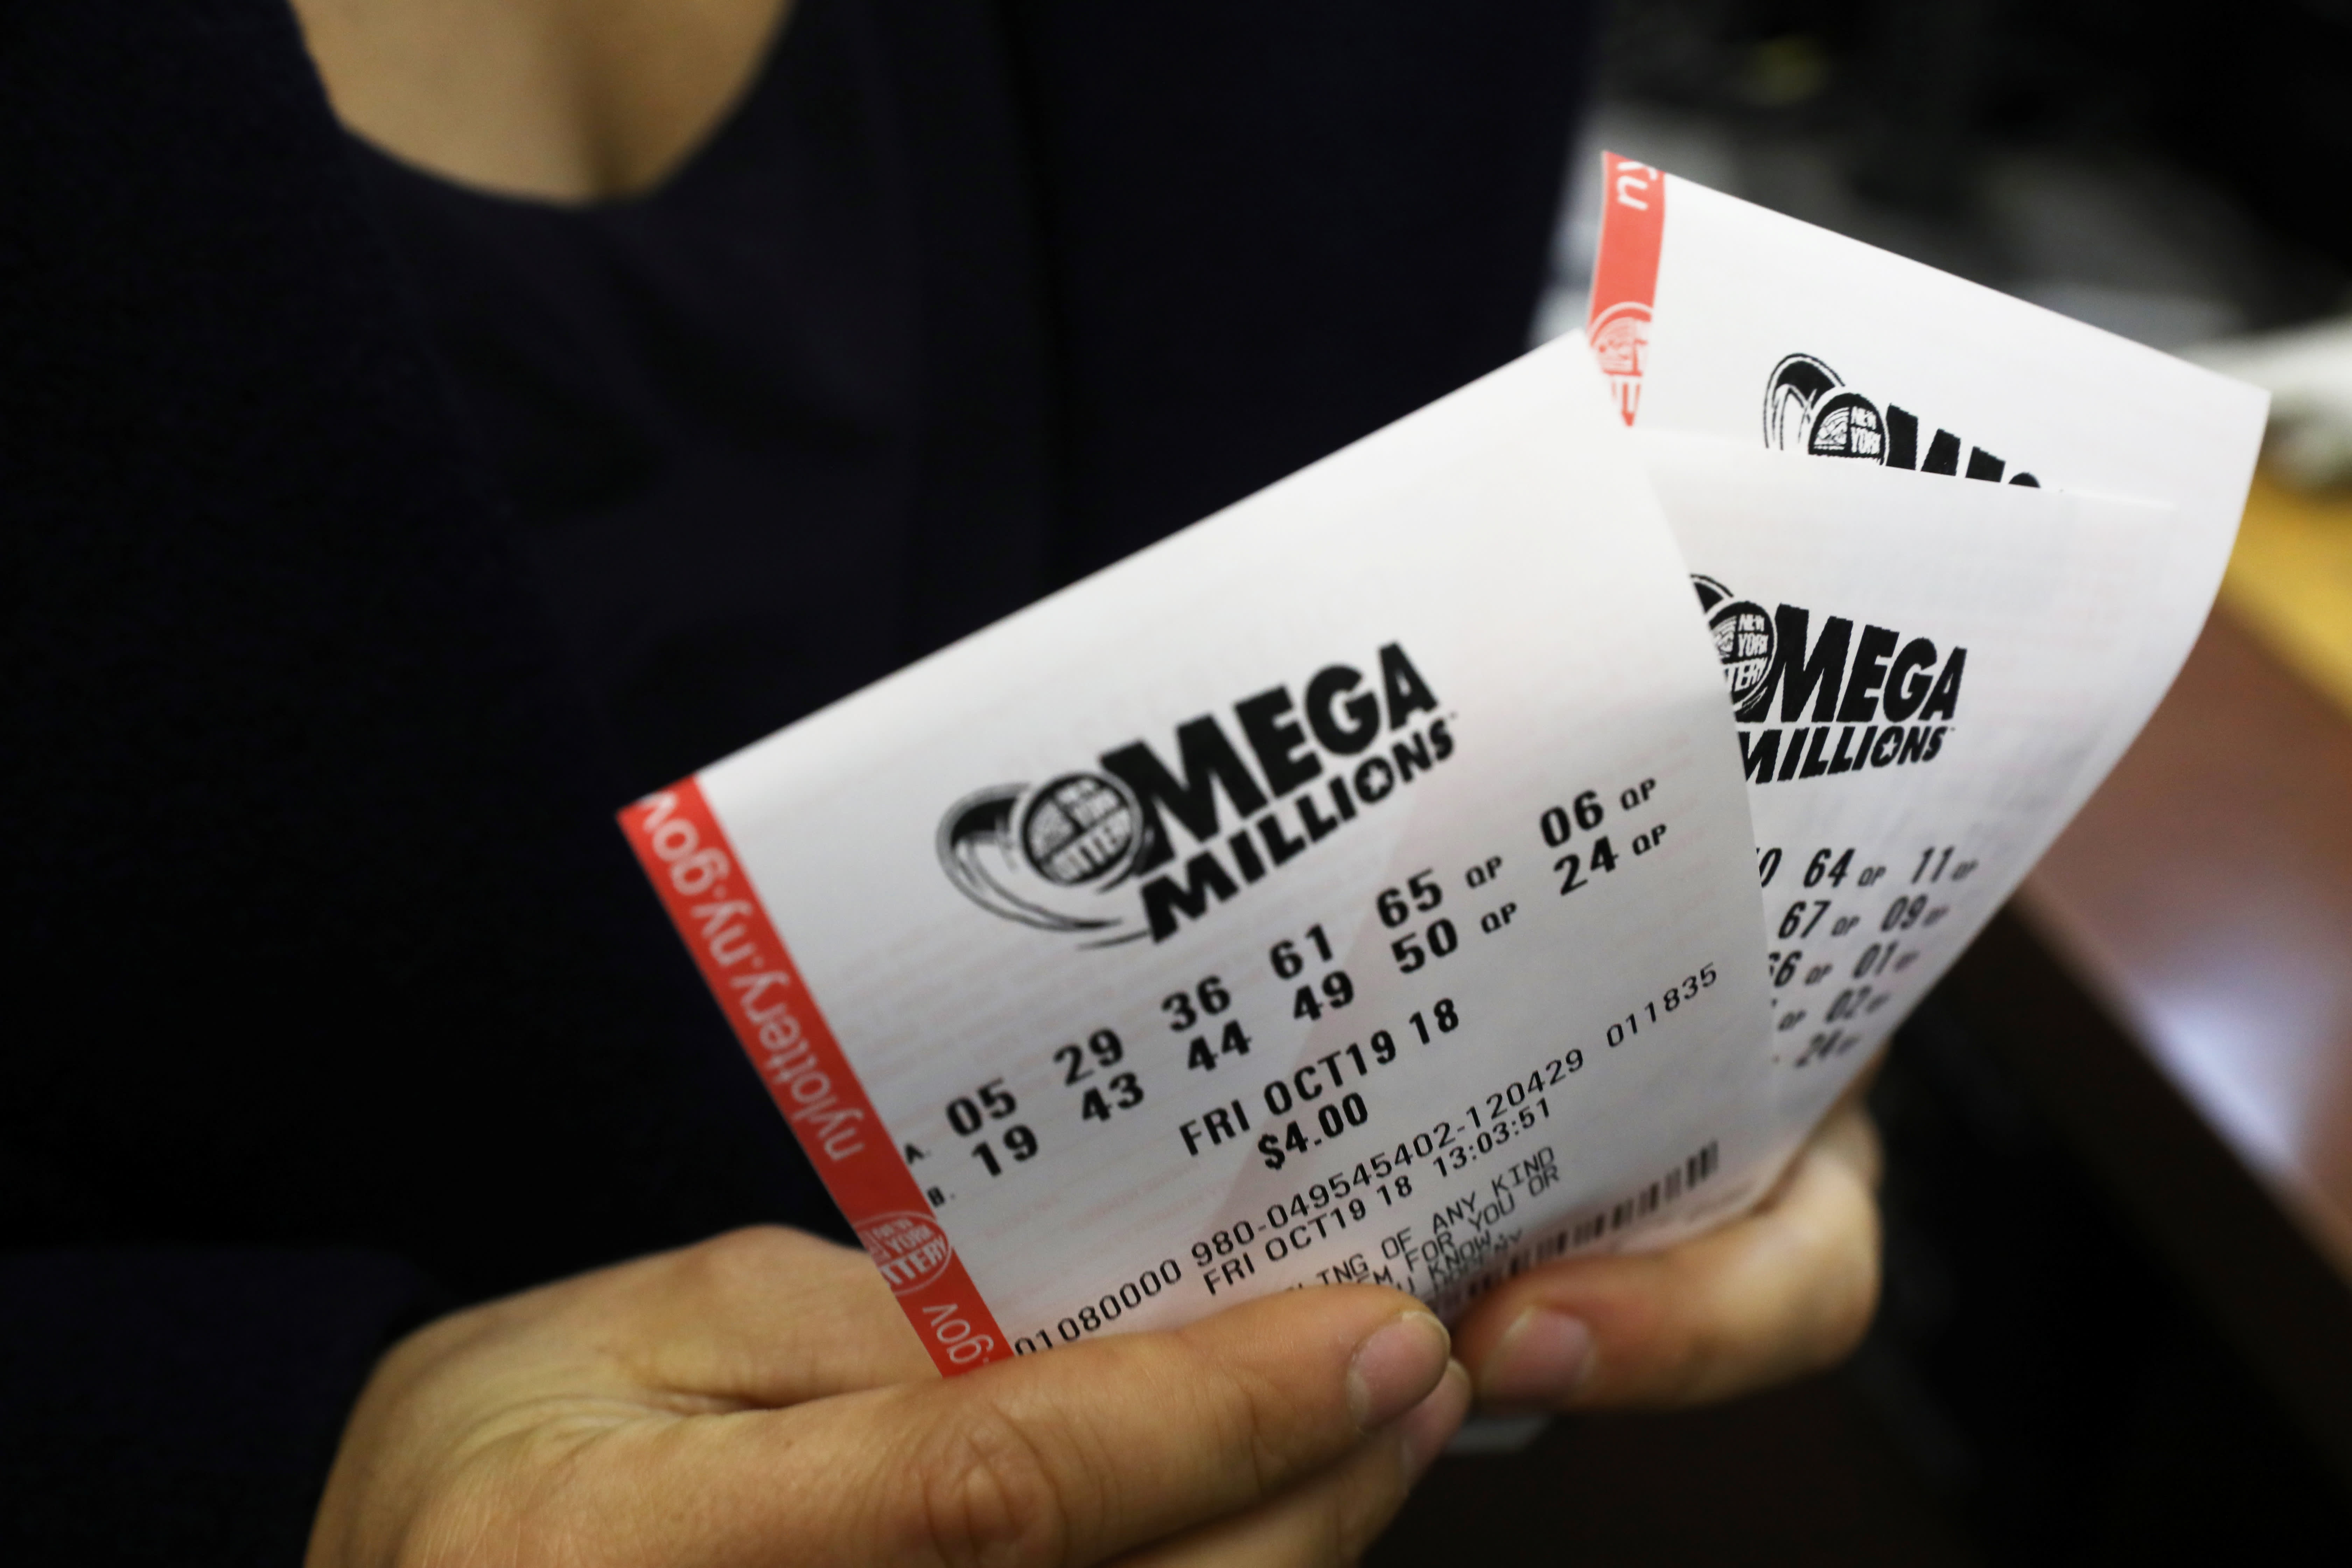 What to do first if you win the $314 million Mega Millions jackpot